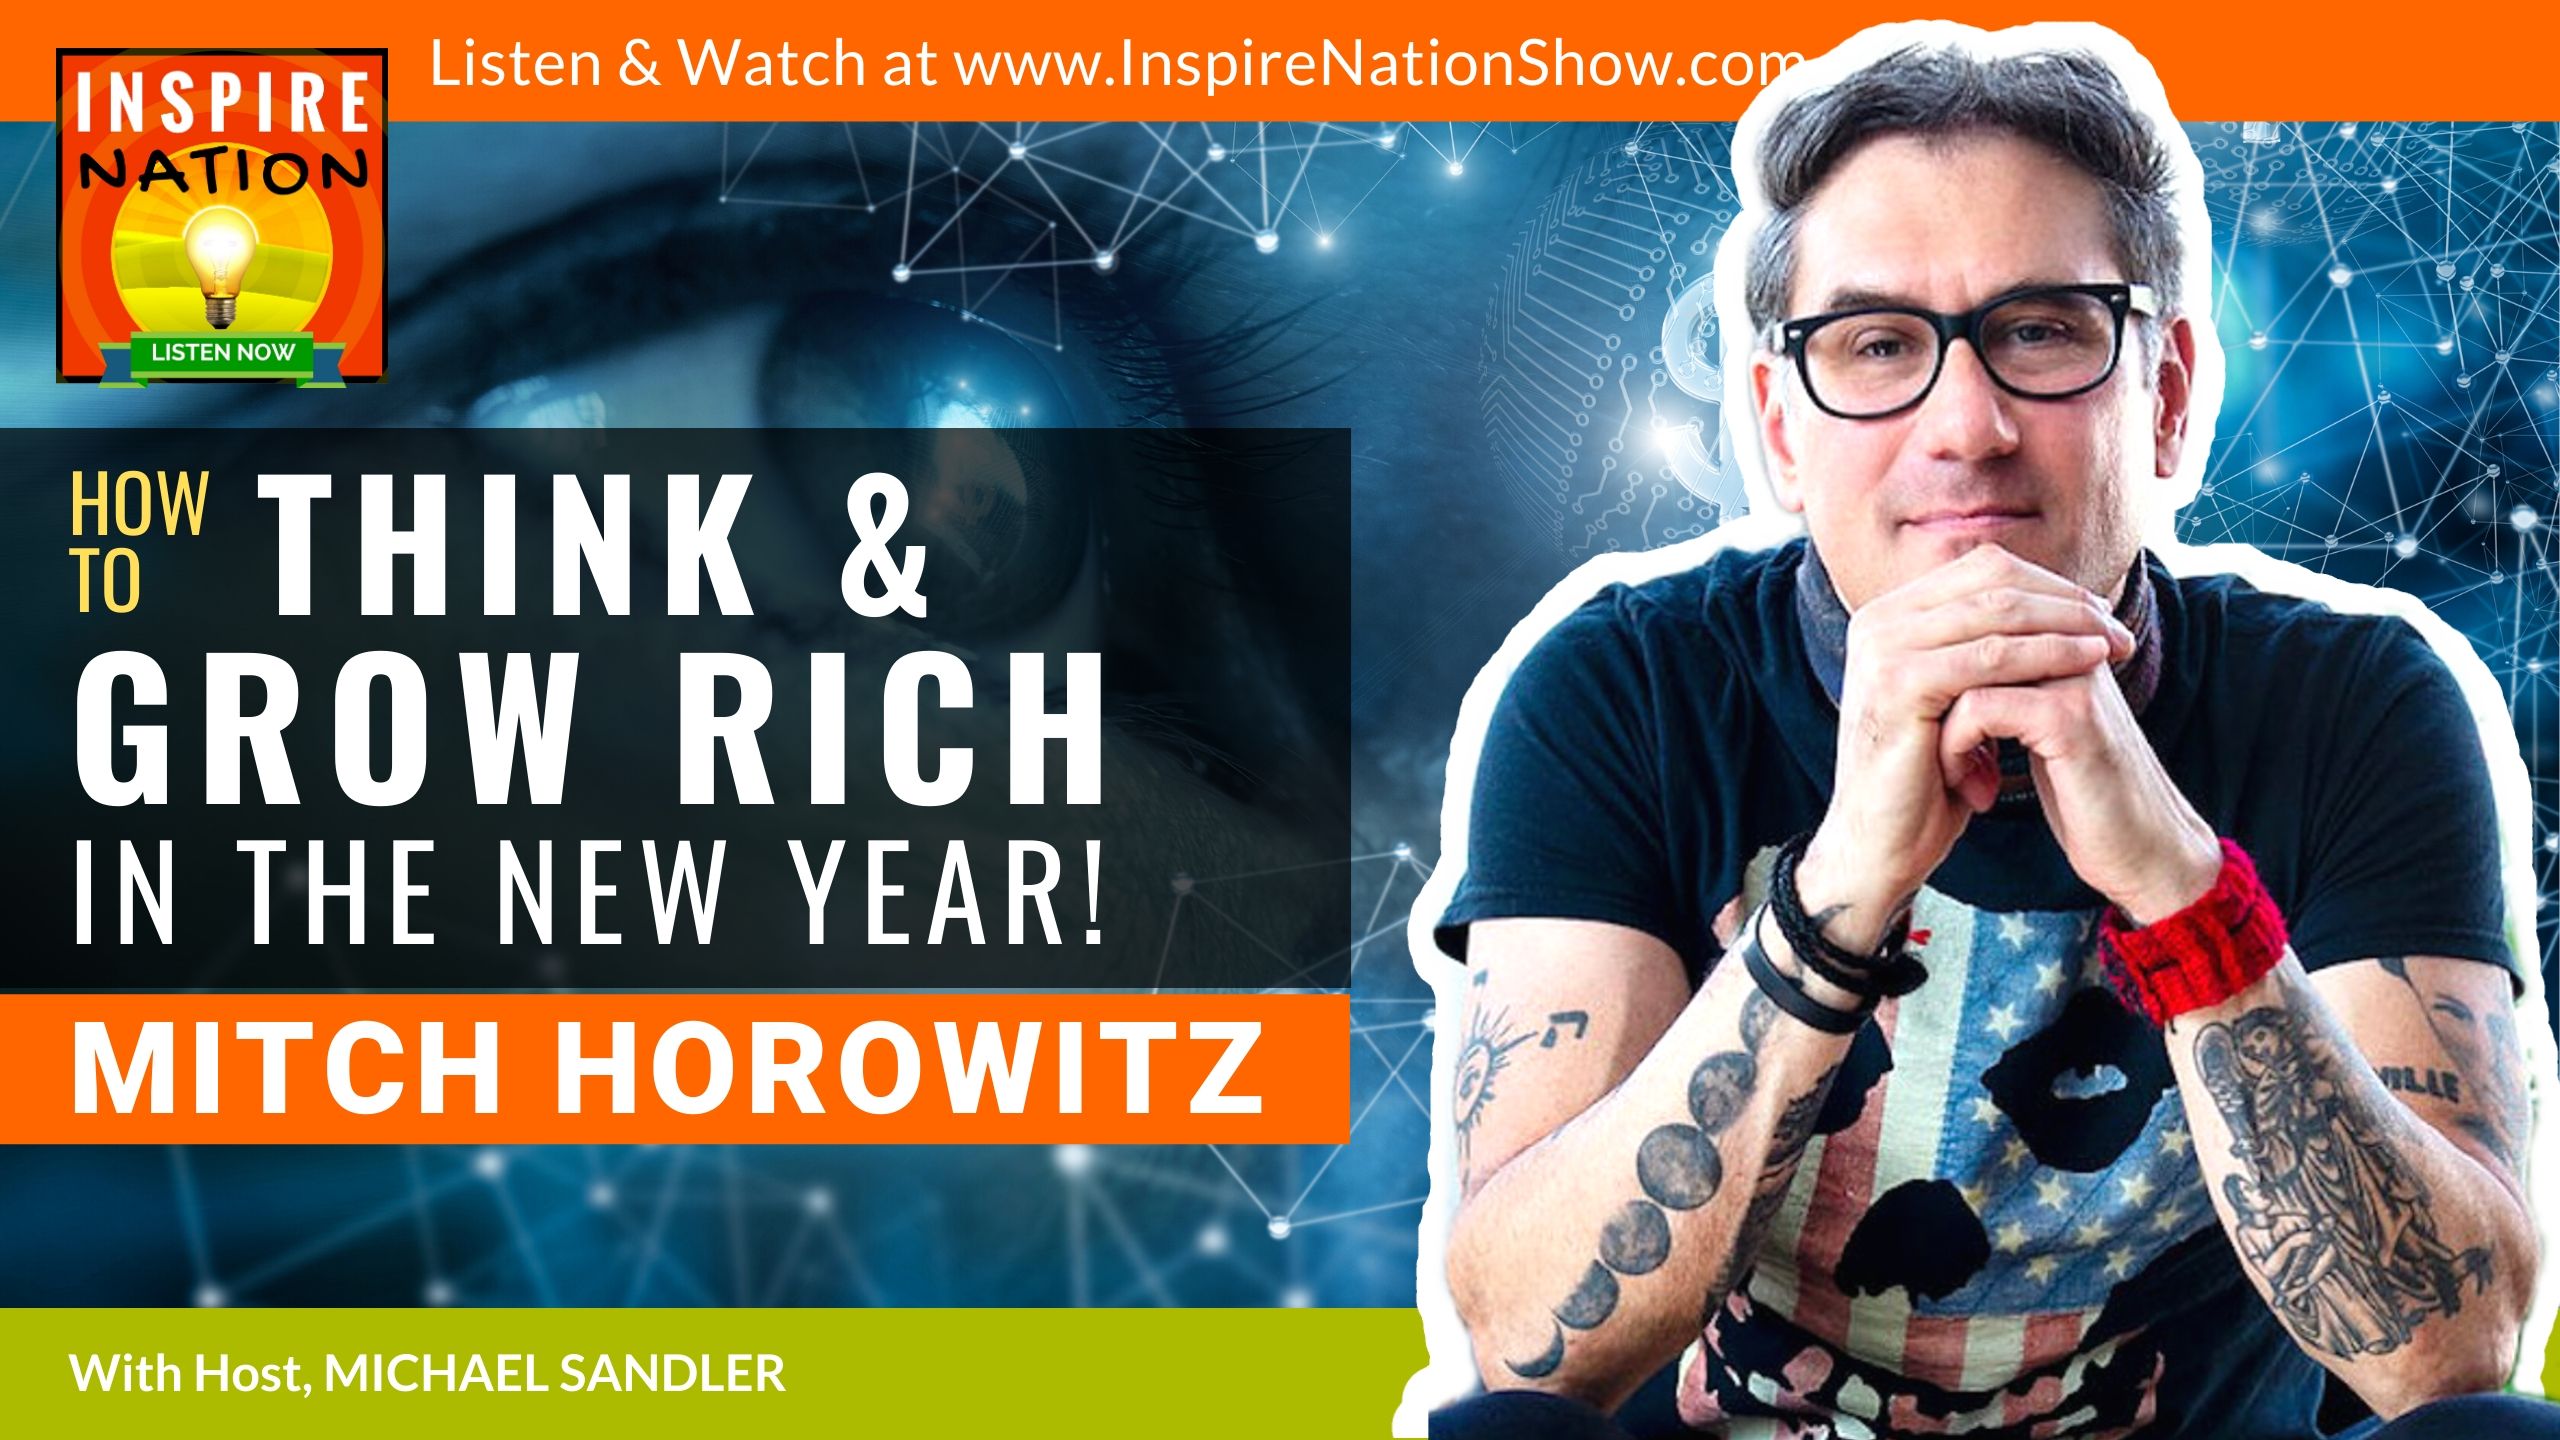 Michael Sandler interviews Mitch Horowitz on how to Think and Grow Rich in the New Year! Take the 10-Day Miracle Challenge with Mitch and Michael!!